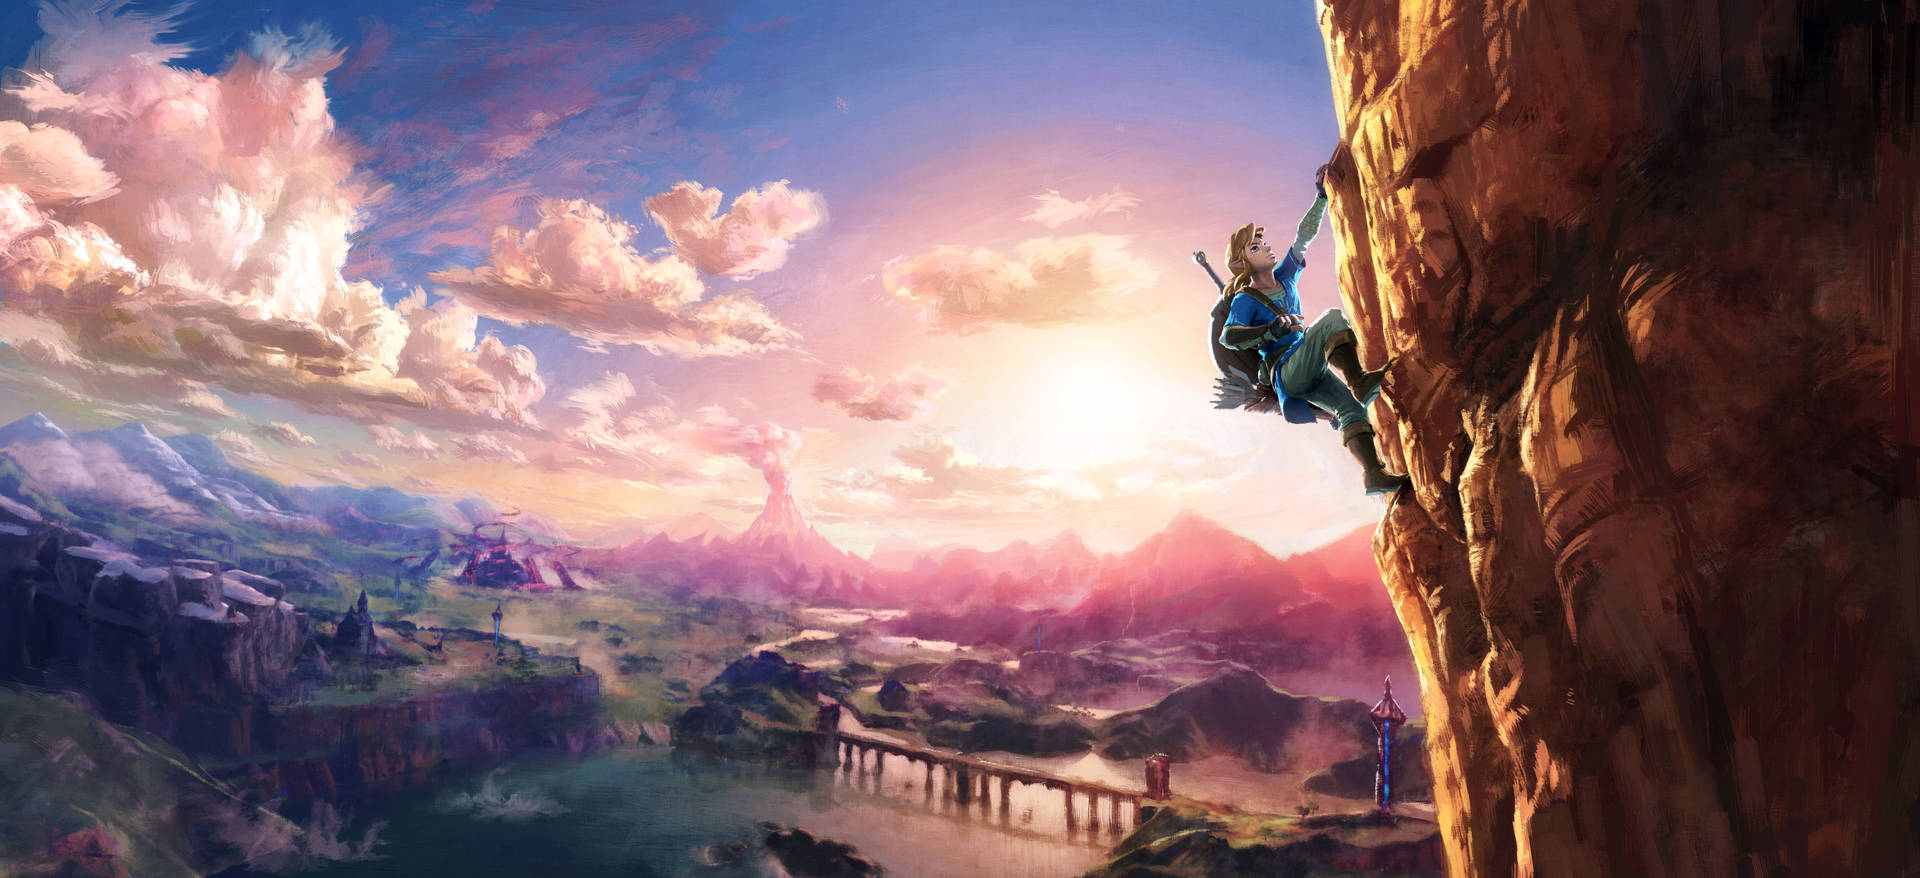 Hd Pink Aesthetic Breath Of The Wild Cover Wallpaper